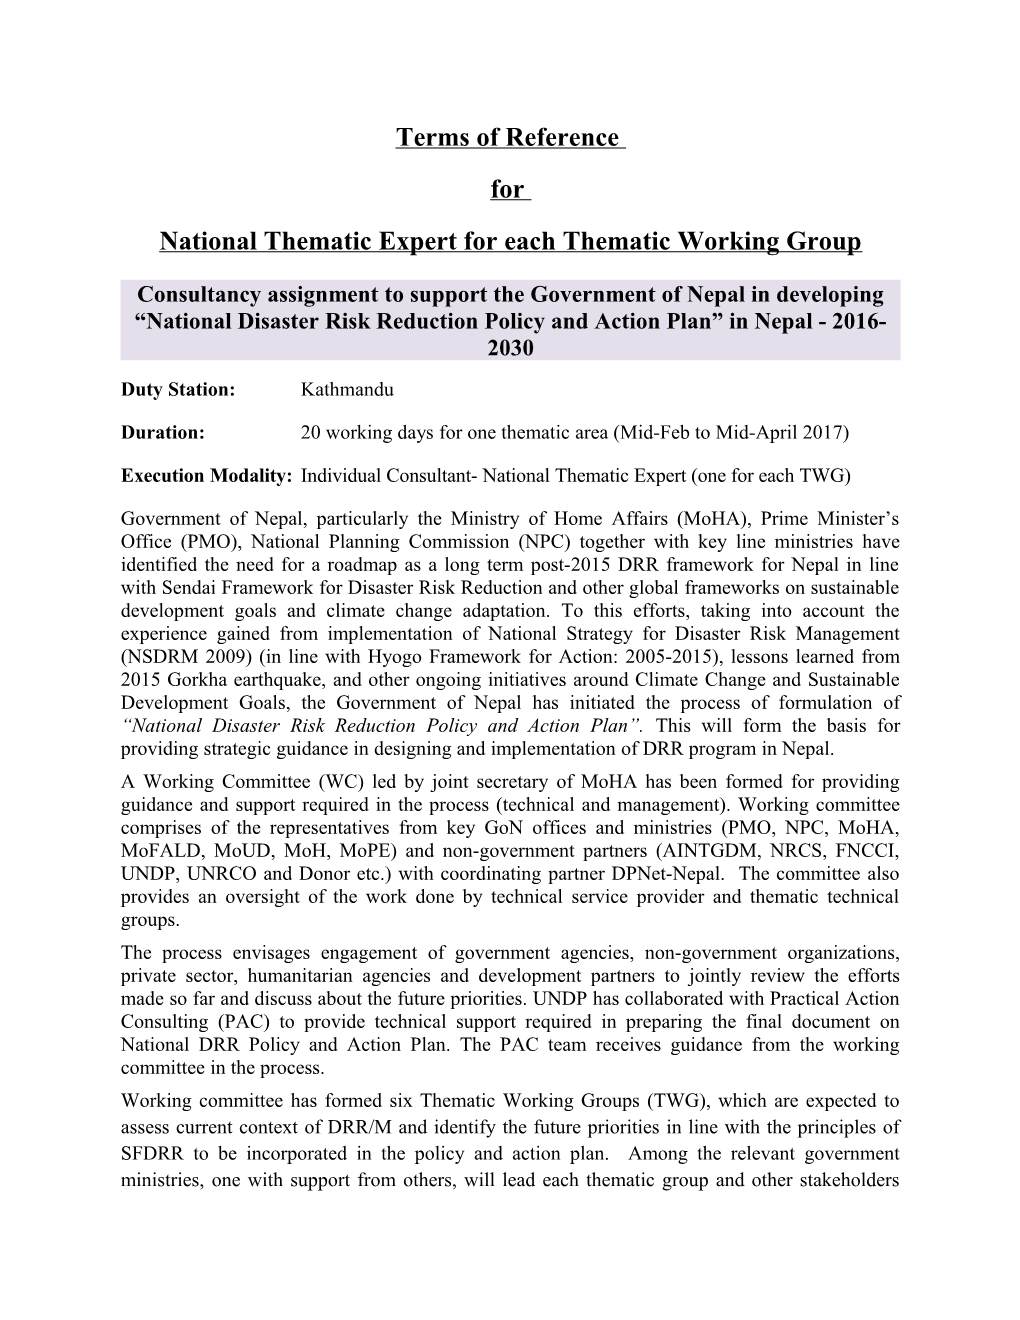 National Thematic Expert for Each Thematic Working Group